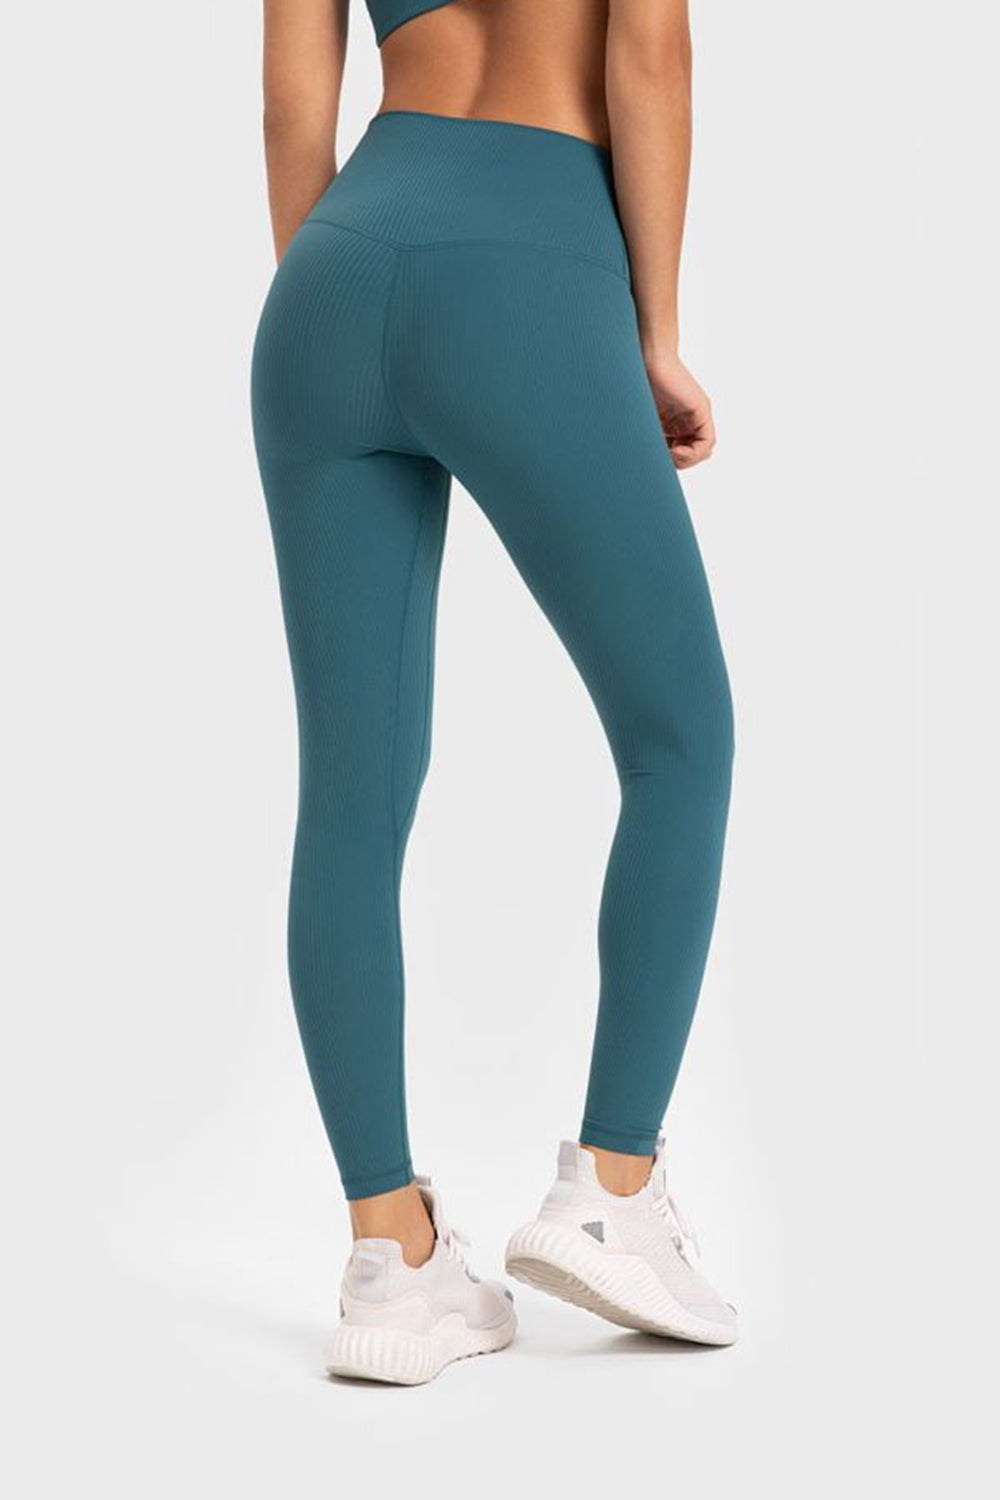 Highly Stretchy Wide Waistband Yoga Leggings - Leggings - FITGGINS